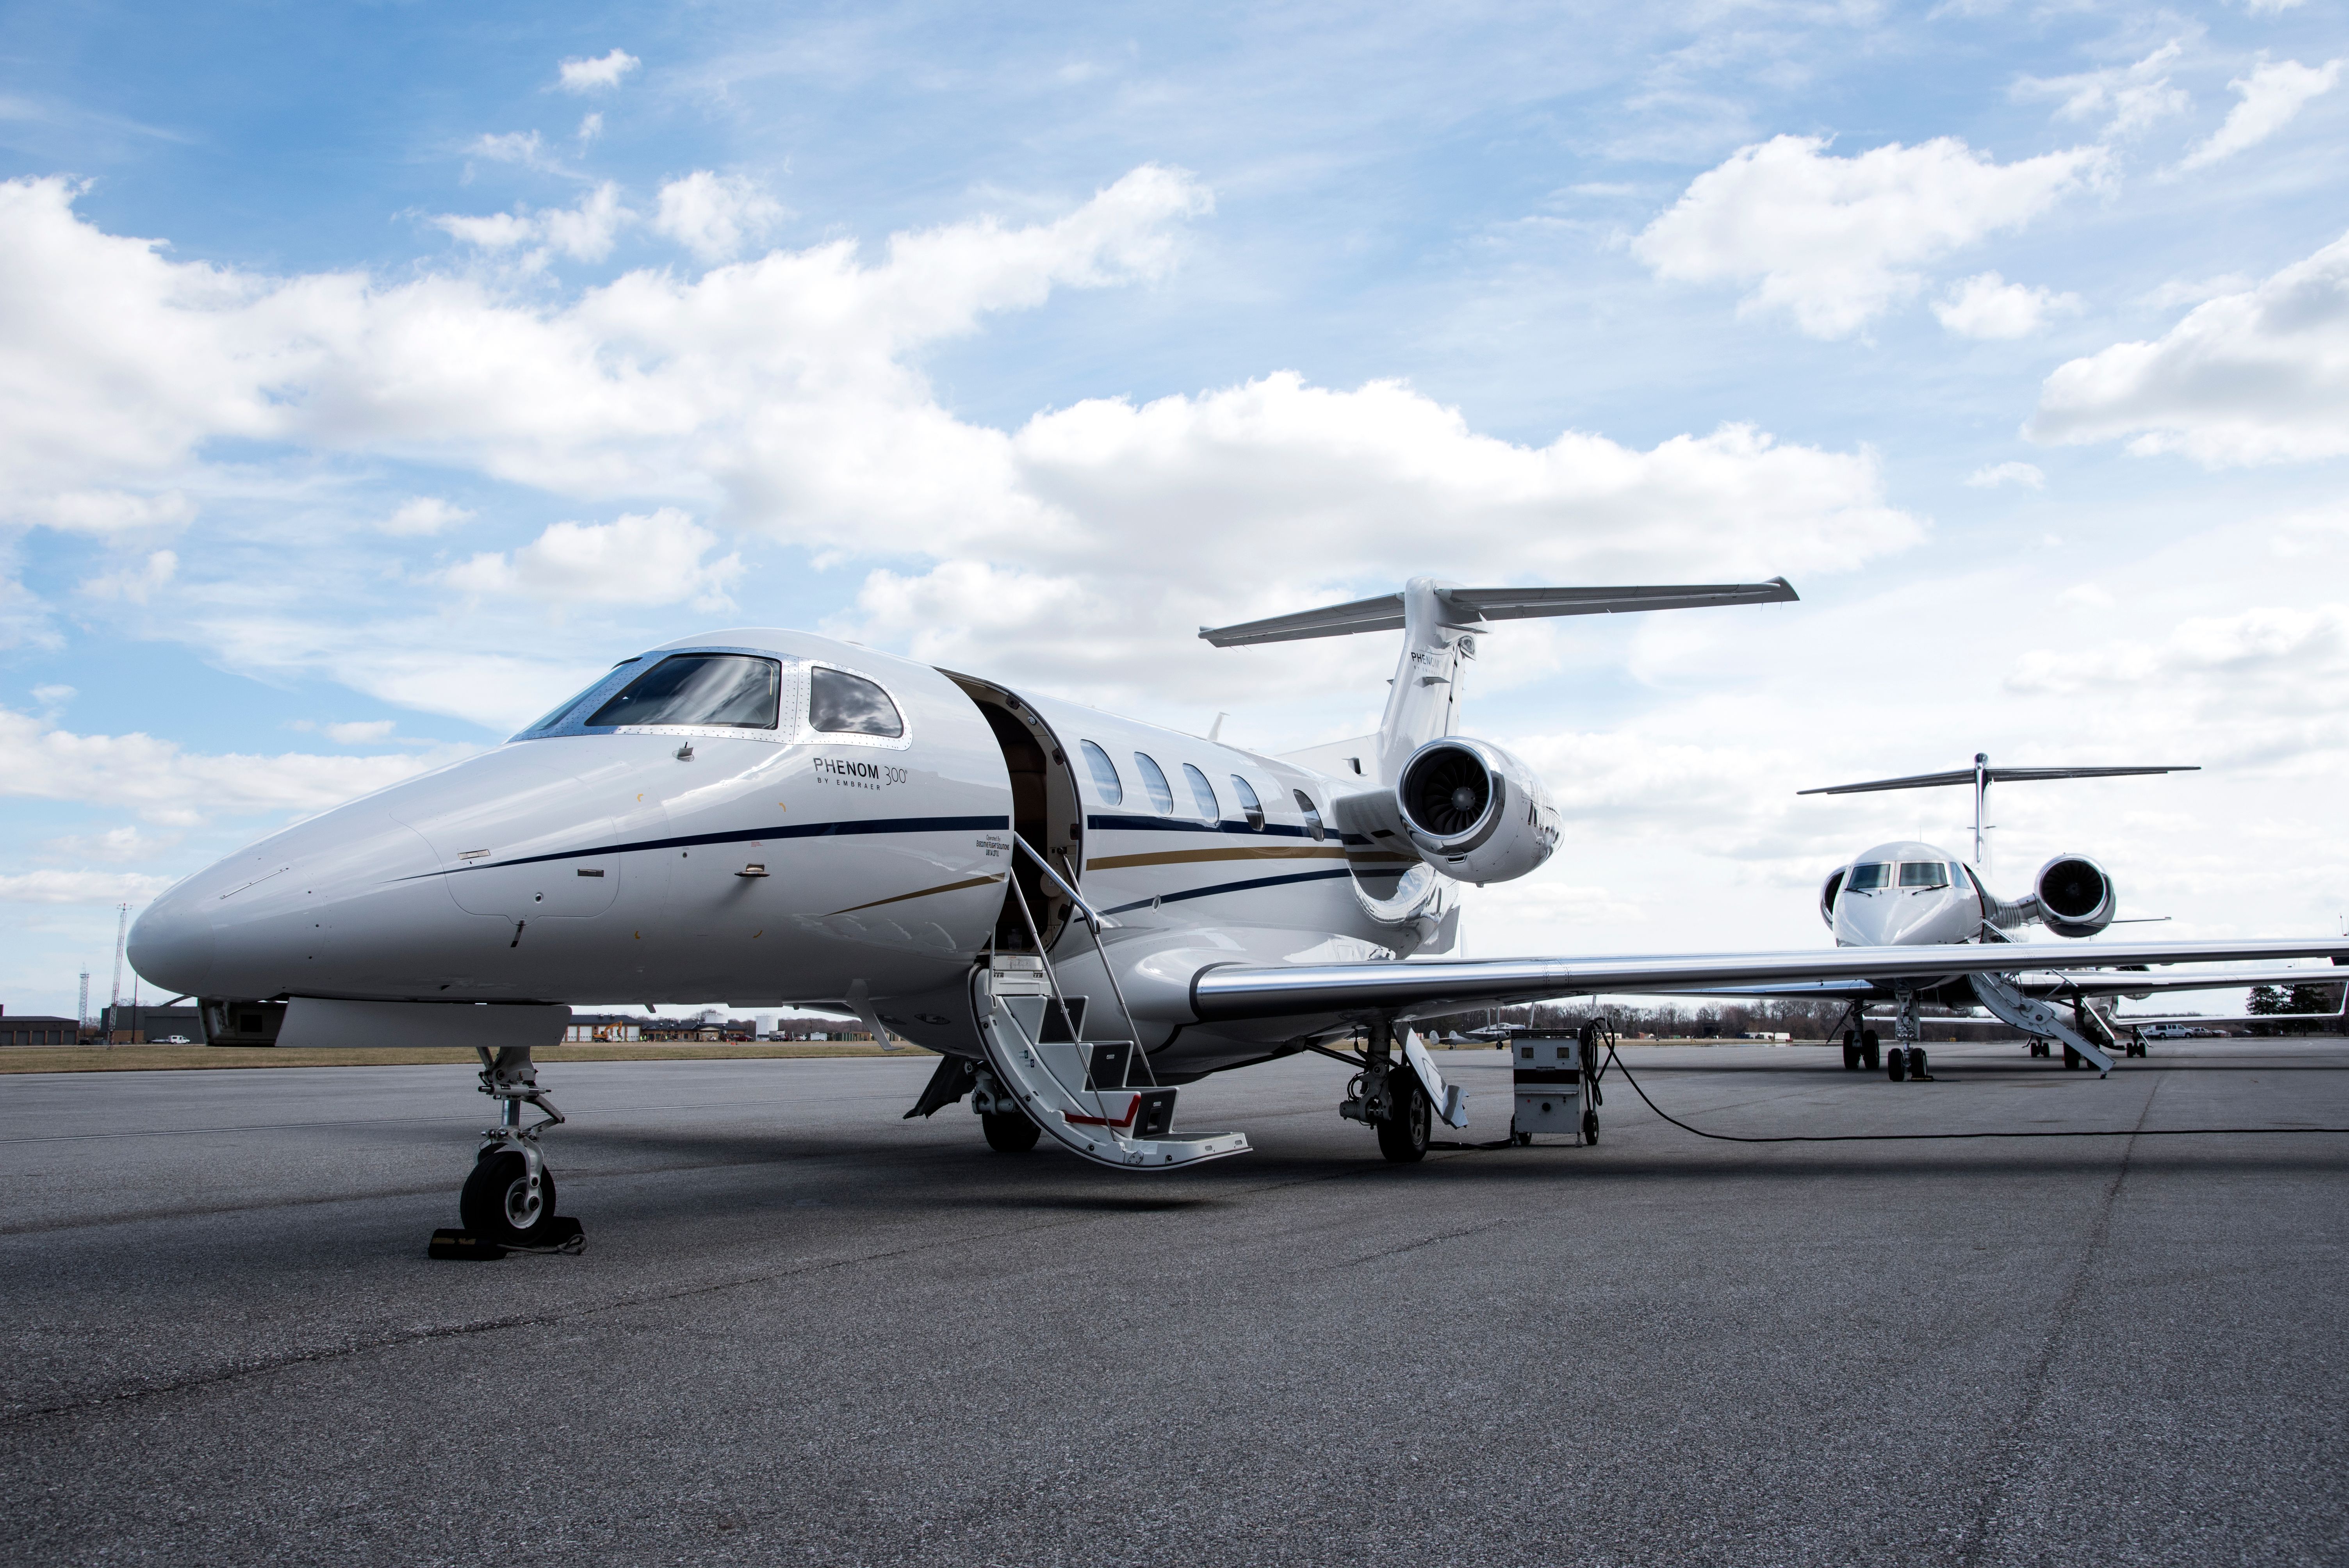 Two Embraer Phenom 300s parked at an airport.